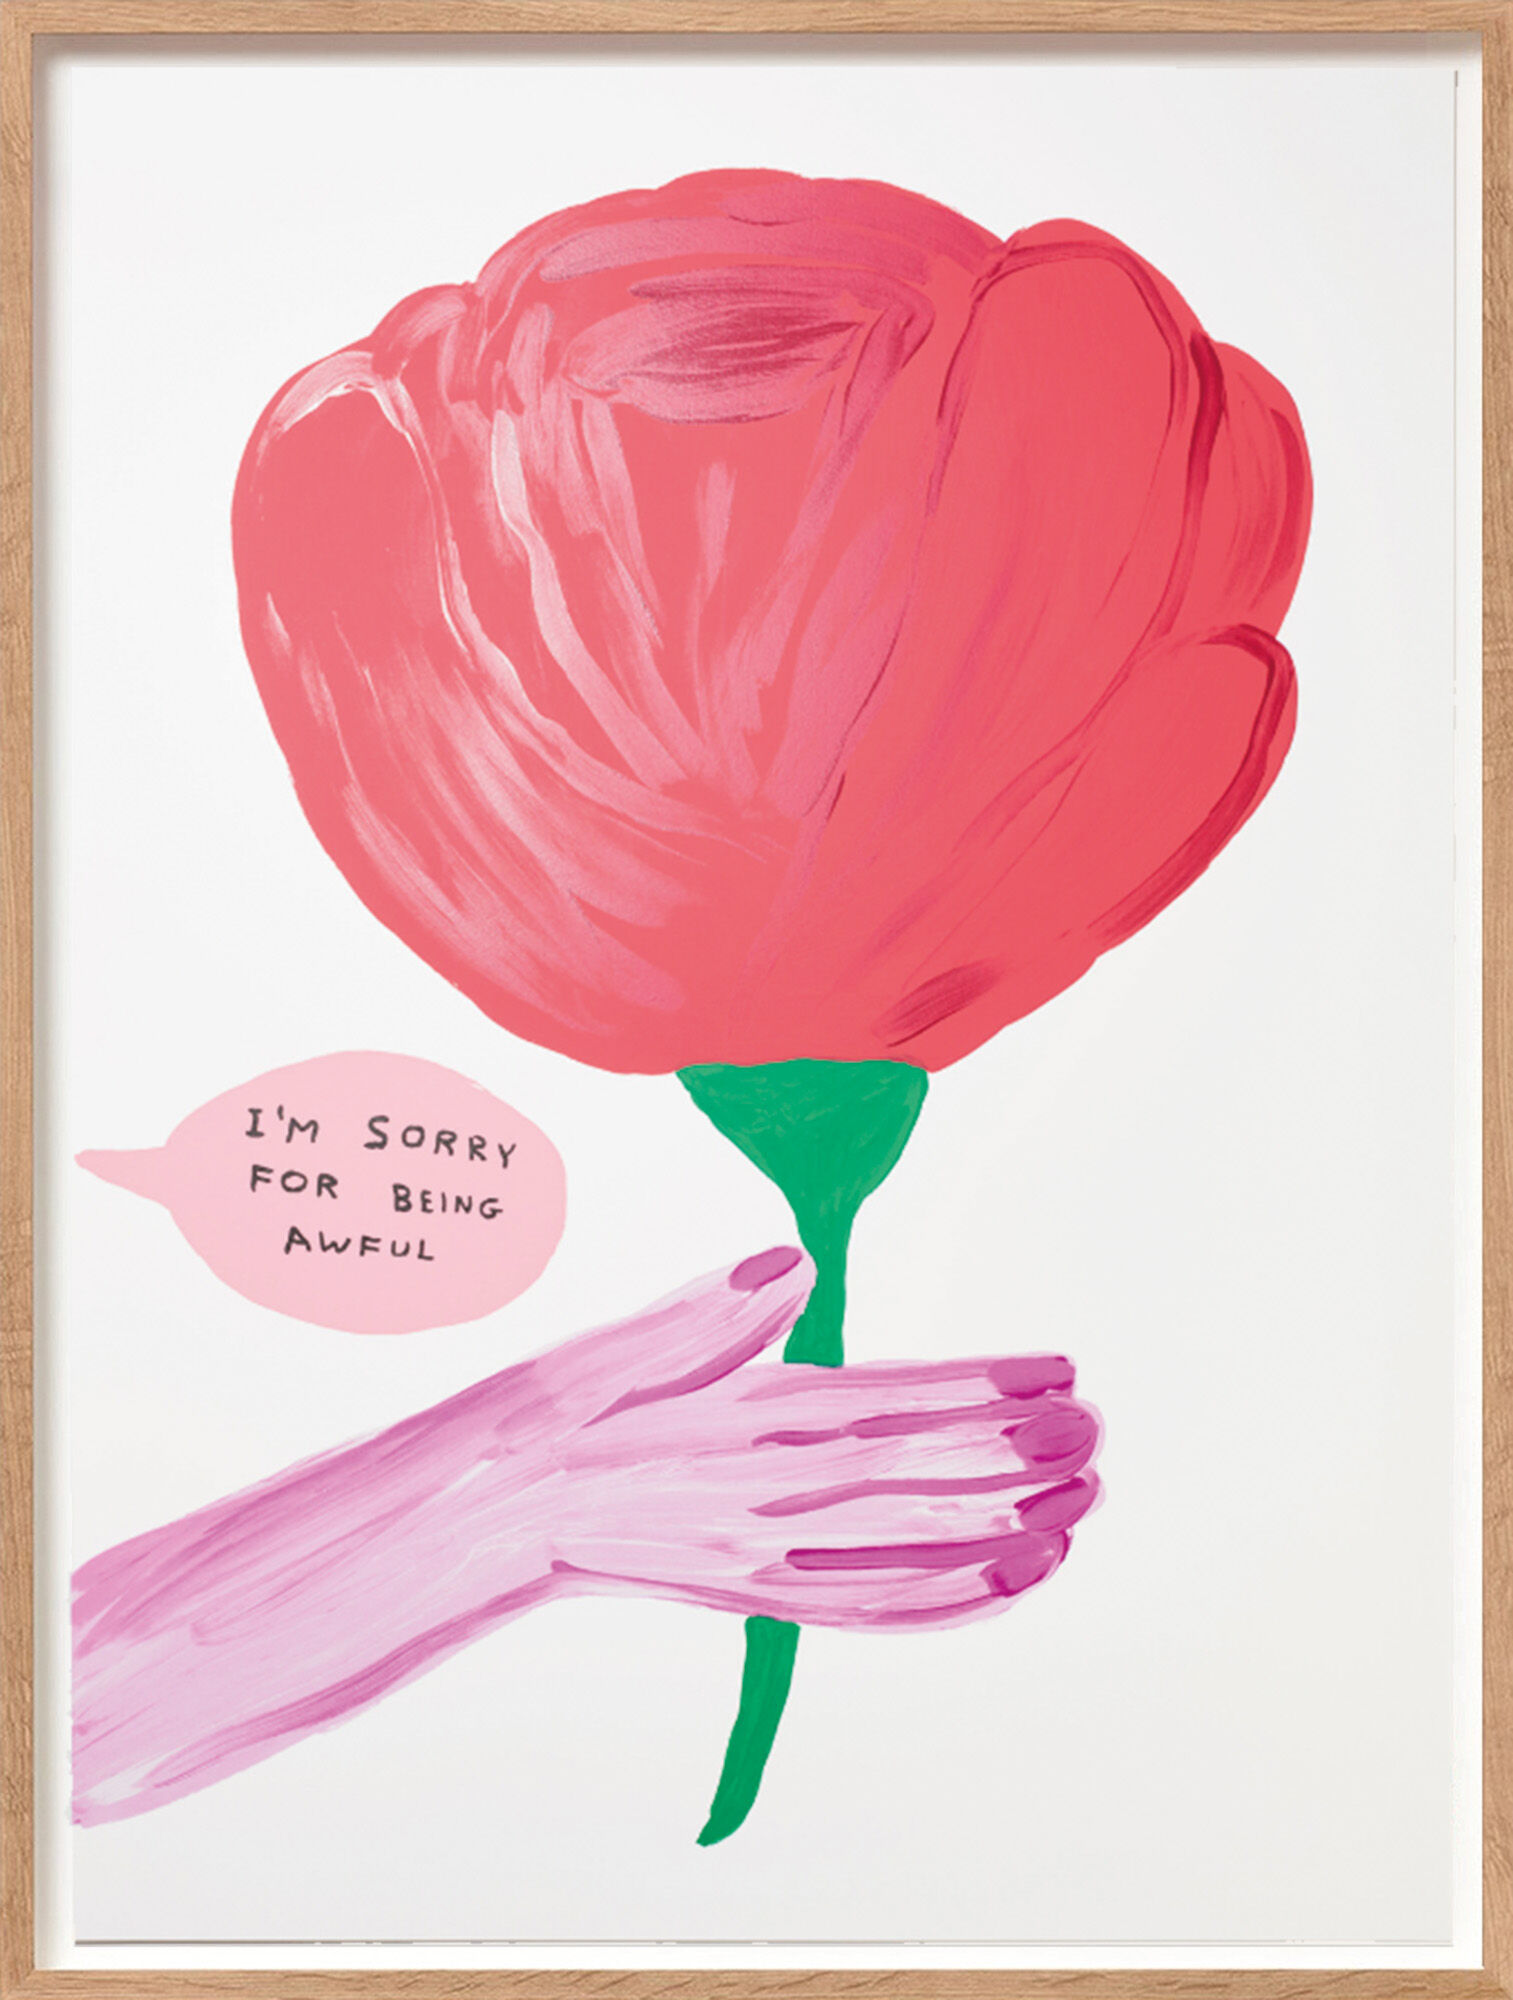 Beeld "I'm sorry for being awful" (2021) von David Shrigley